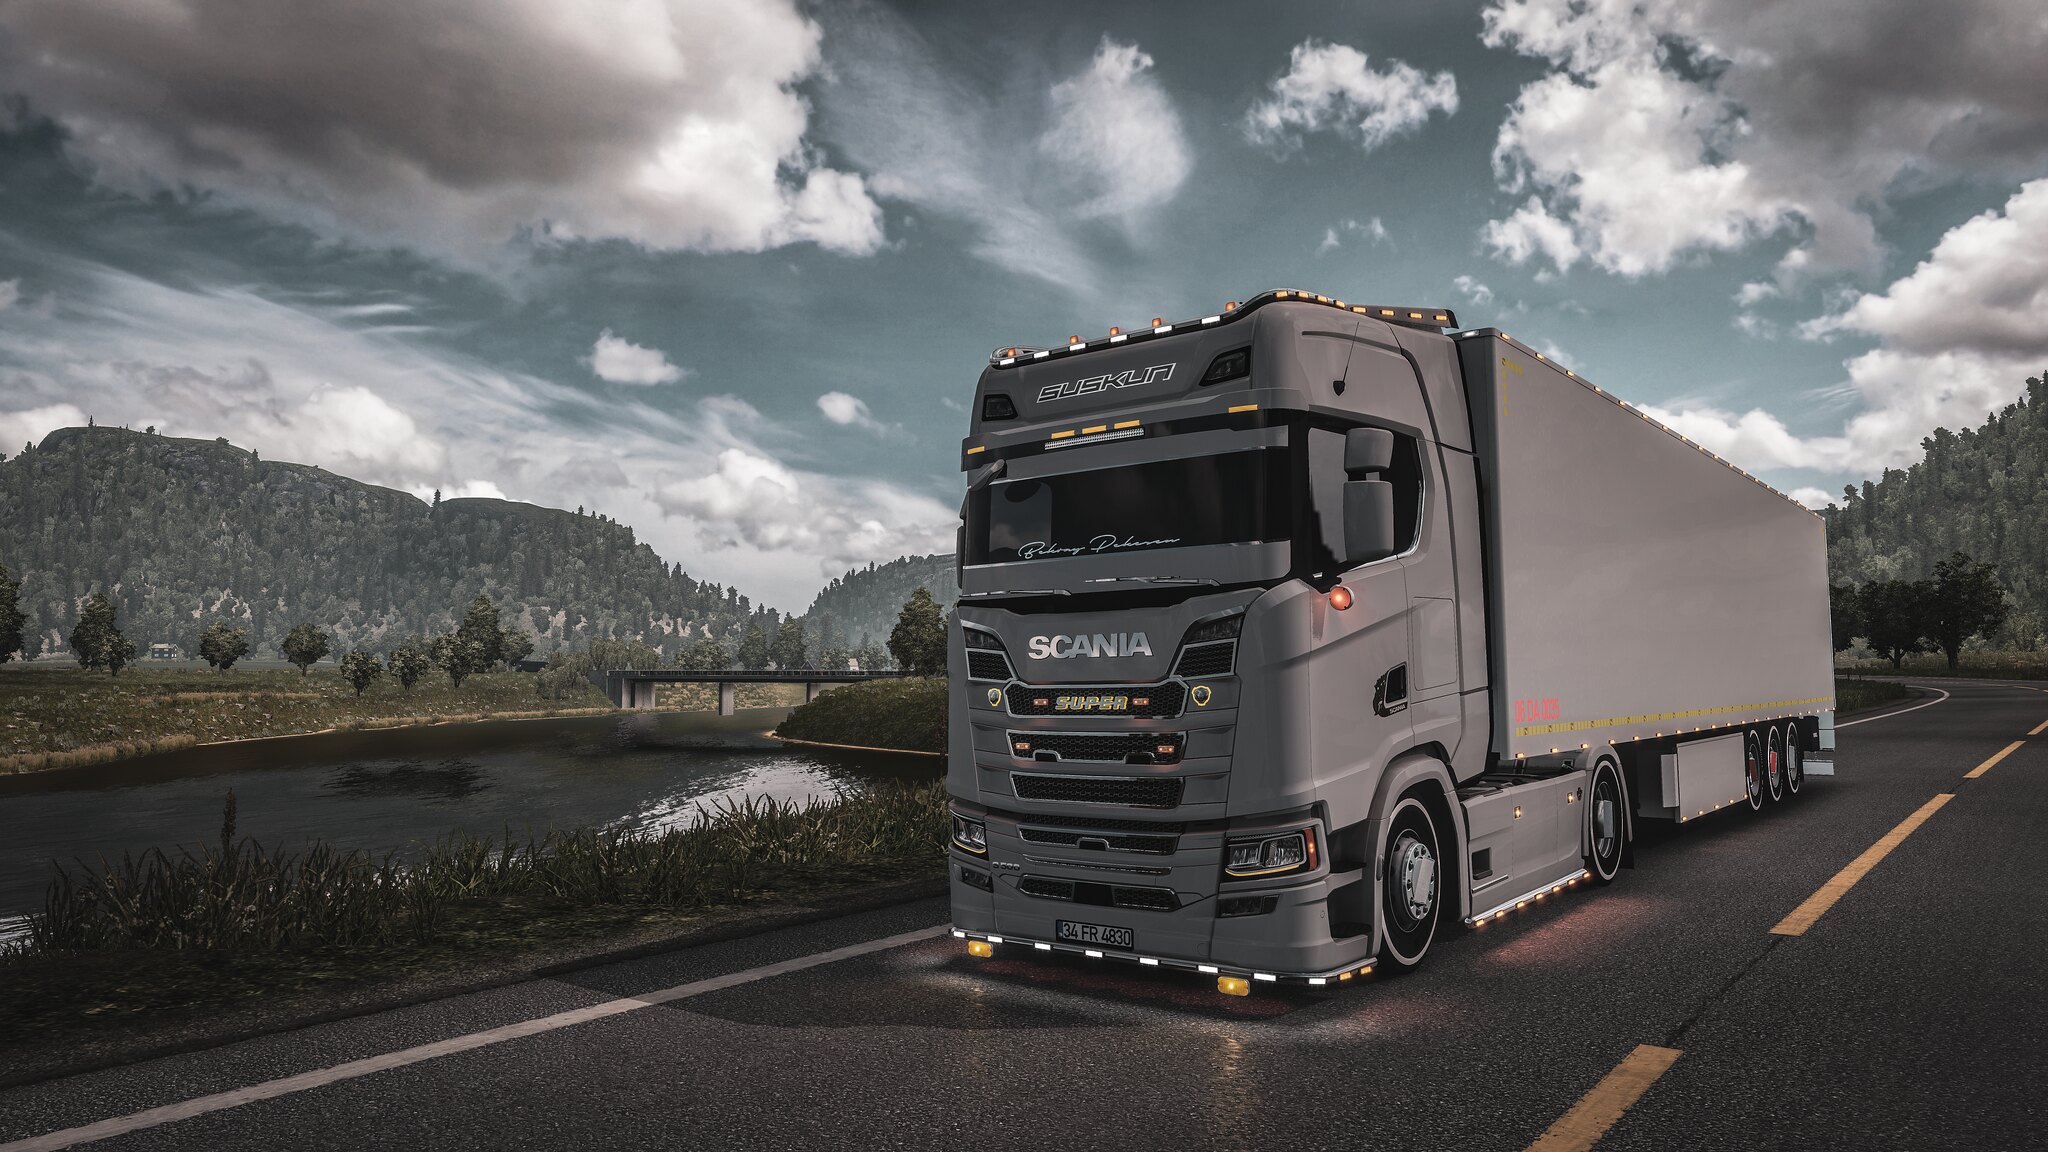 Ets2 Scania S Tuning 140x Euro Truck Simulator 2 Modsclub | Images and ...